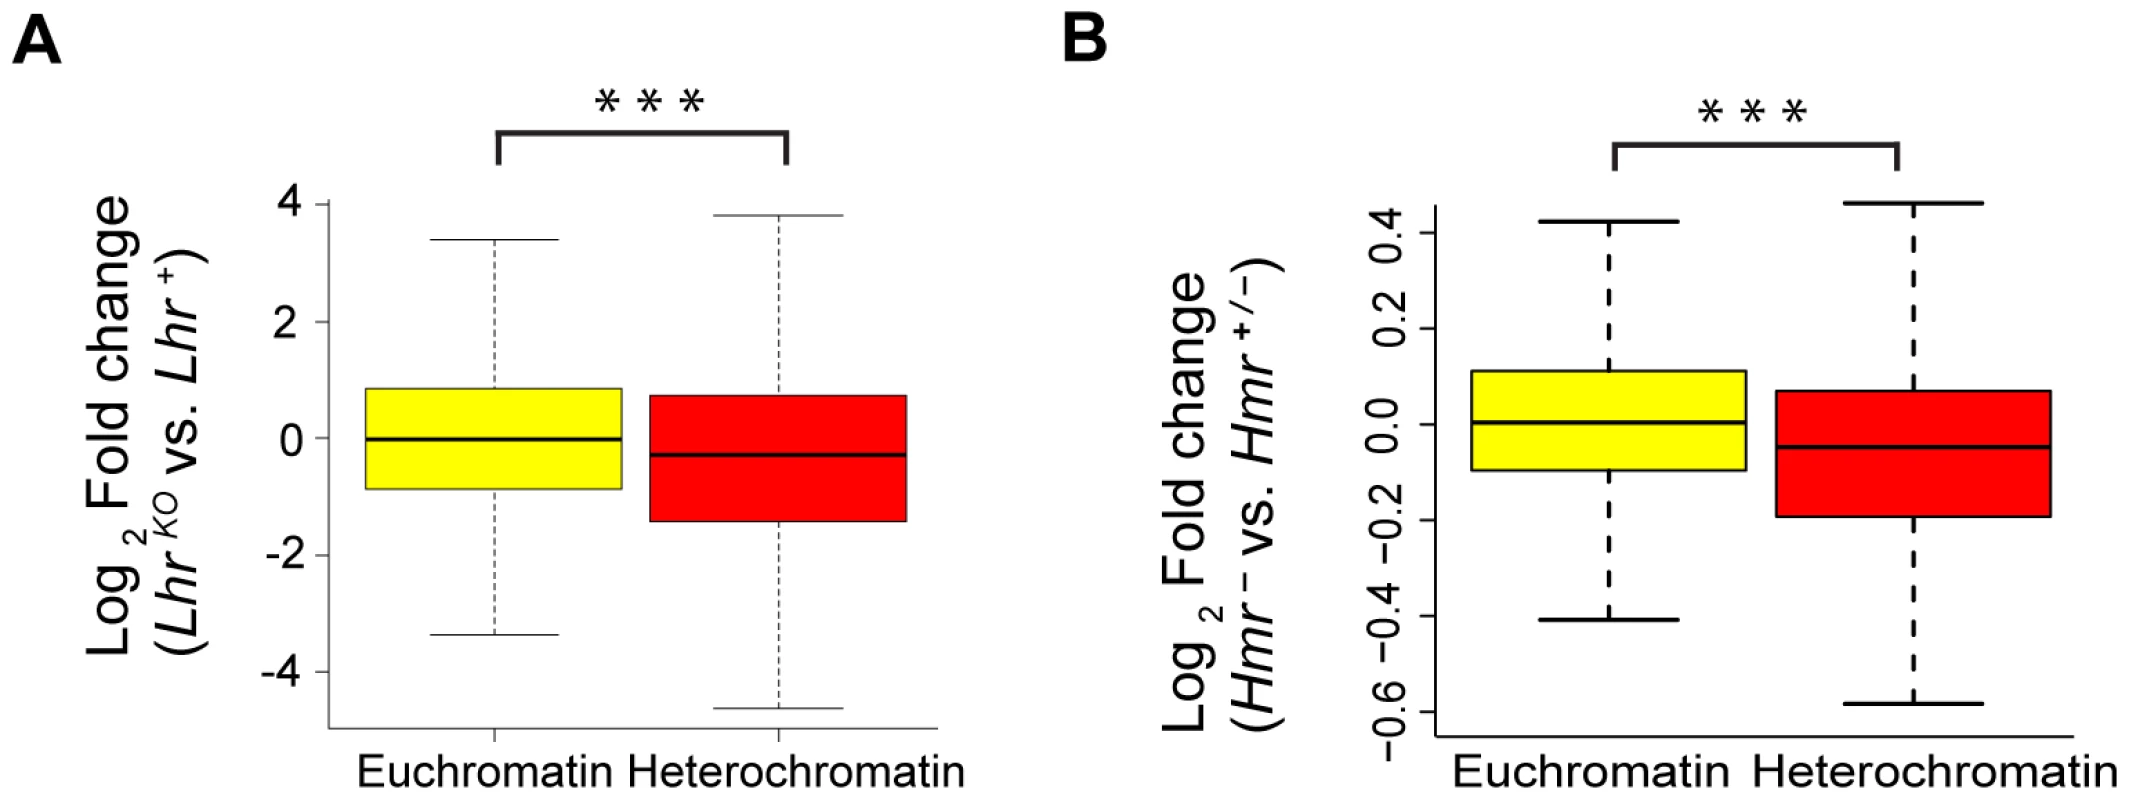 Reduced expression of heterochromatic genes in <i>Lhr</i> and <i>Hmr</i> mutants.